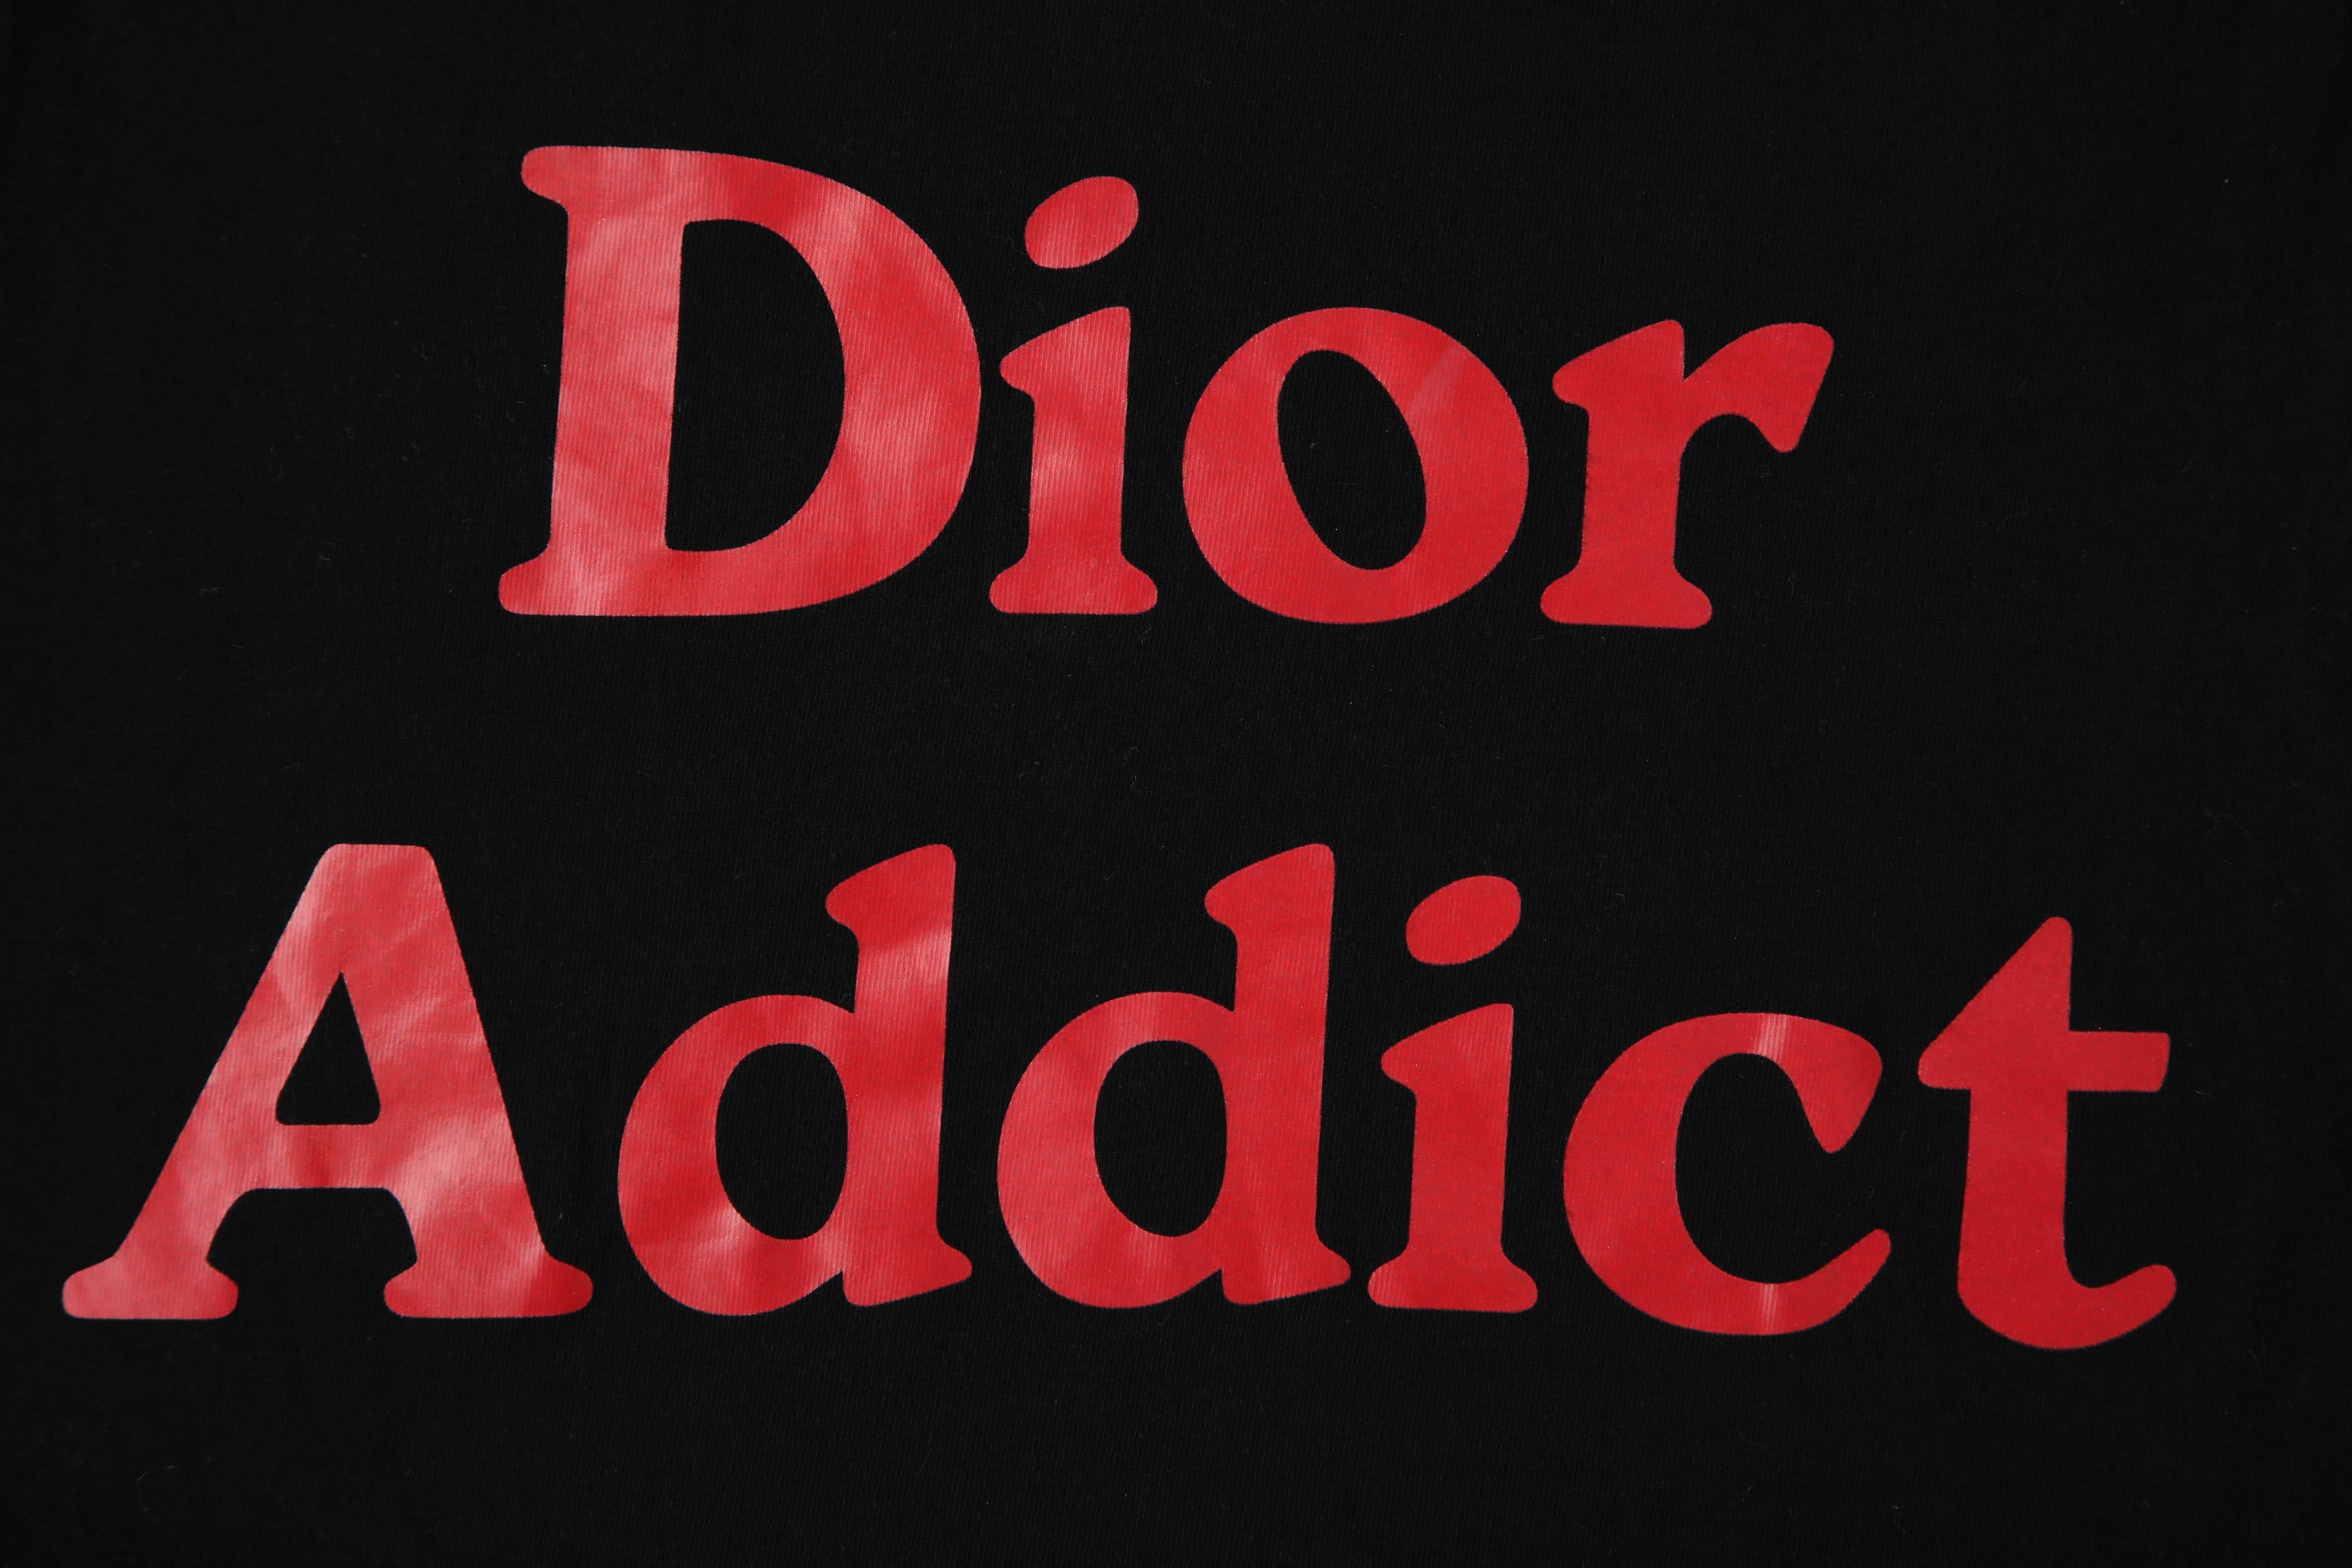 John Galliano for Christian Dior tank top with iconic Dior Addict logo in red.

French size 42
